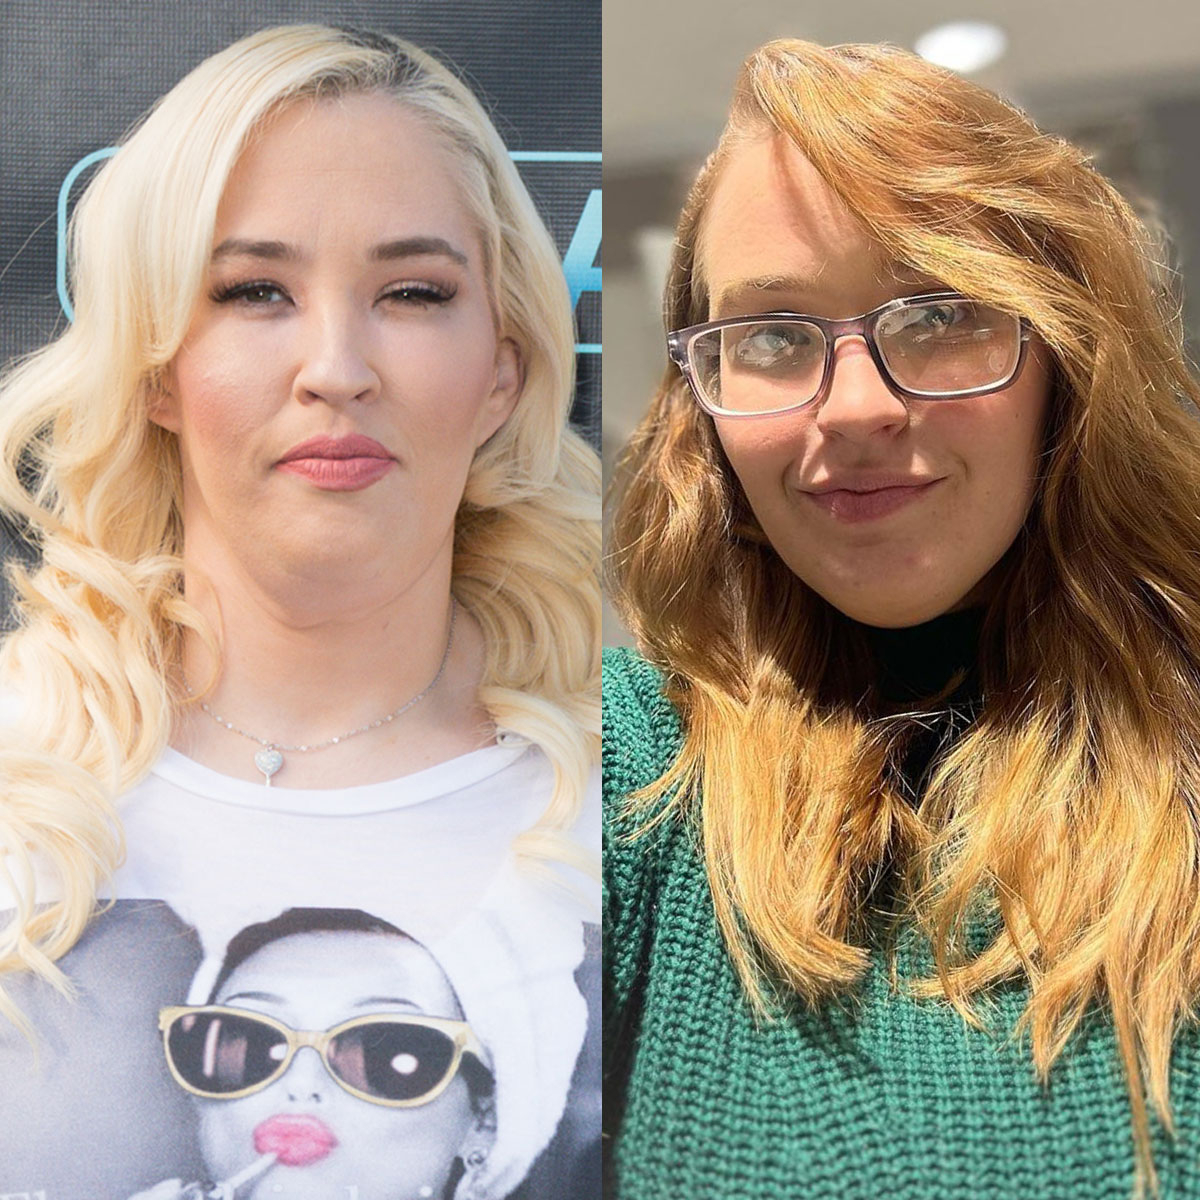 Mama June Shannon Shares Update on Daughter Anna’s Cancer Battle